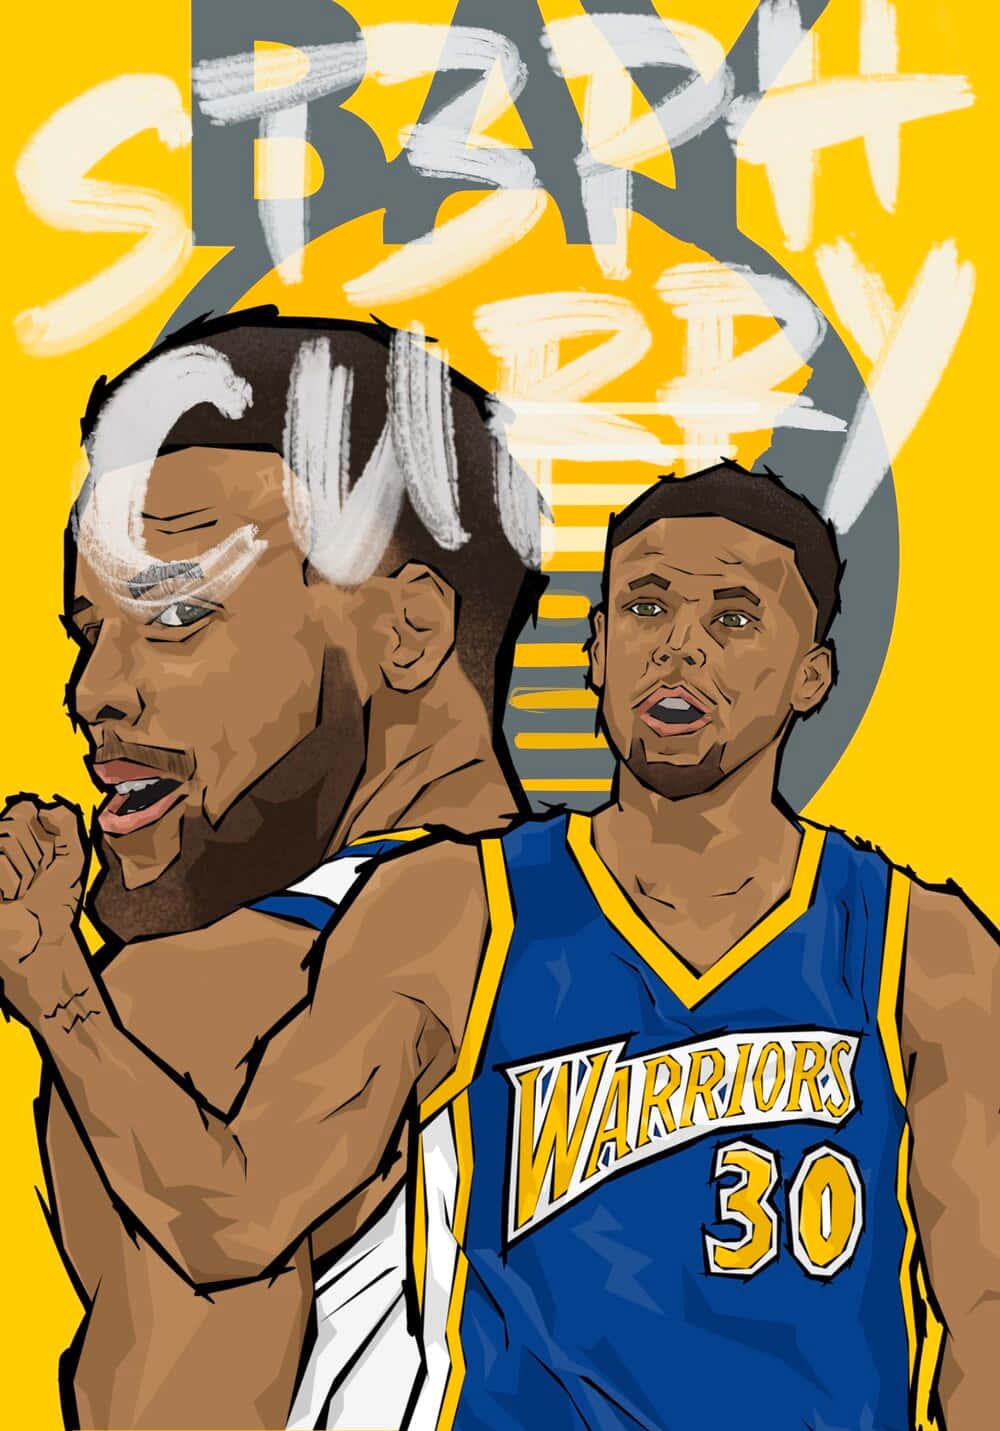 Time Nba Champion Stephen Curry Wallpaper